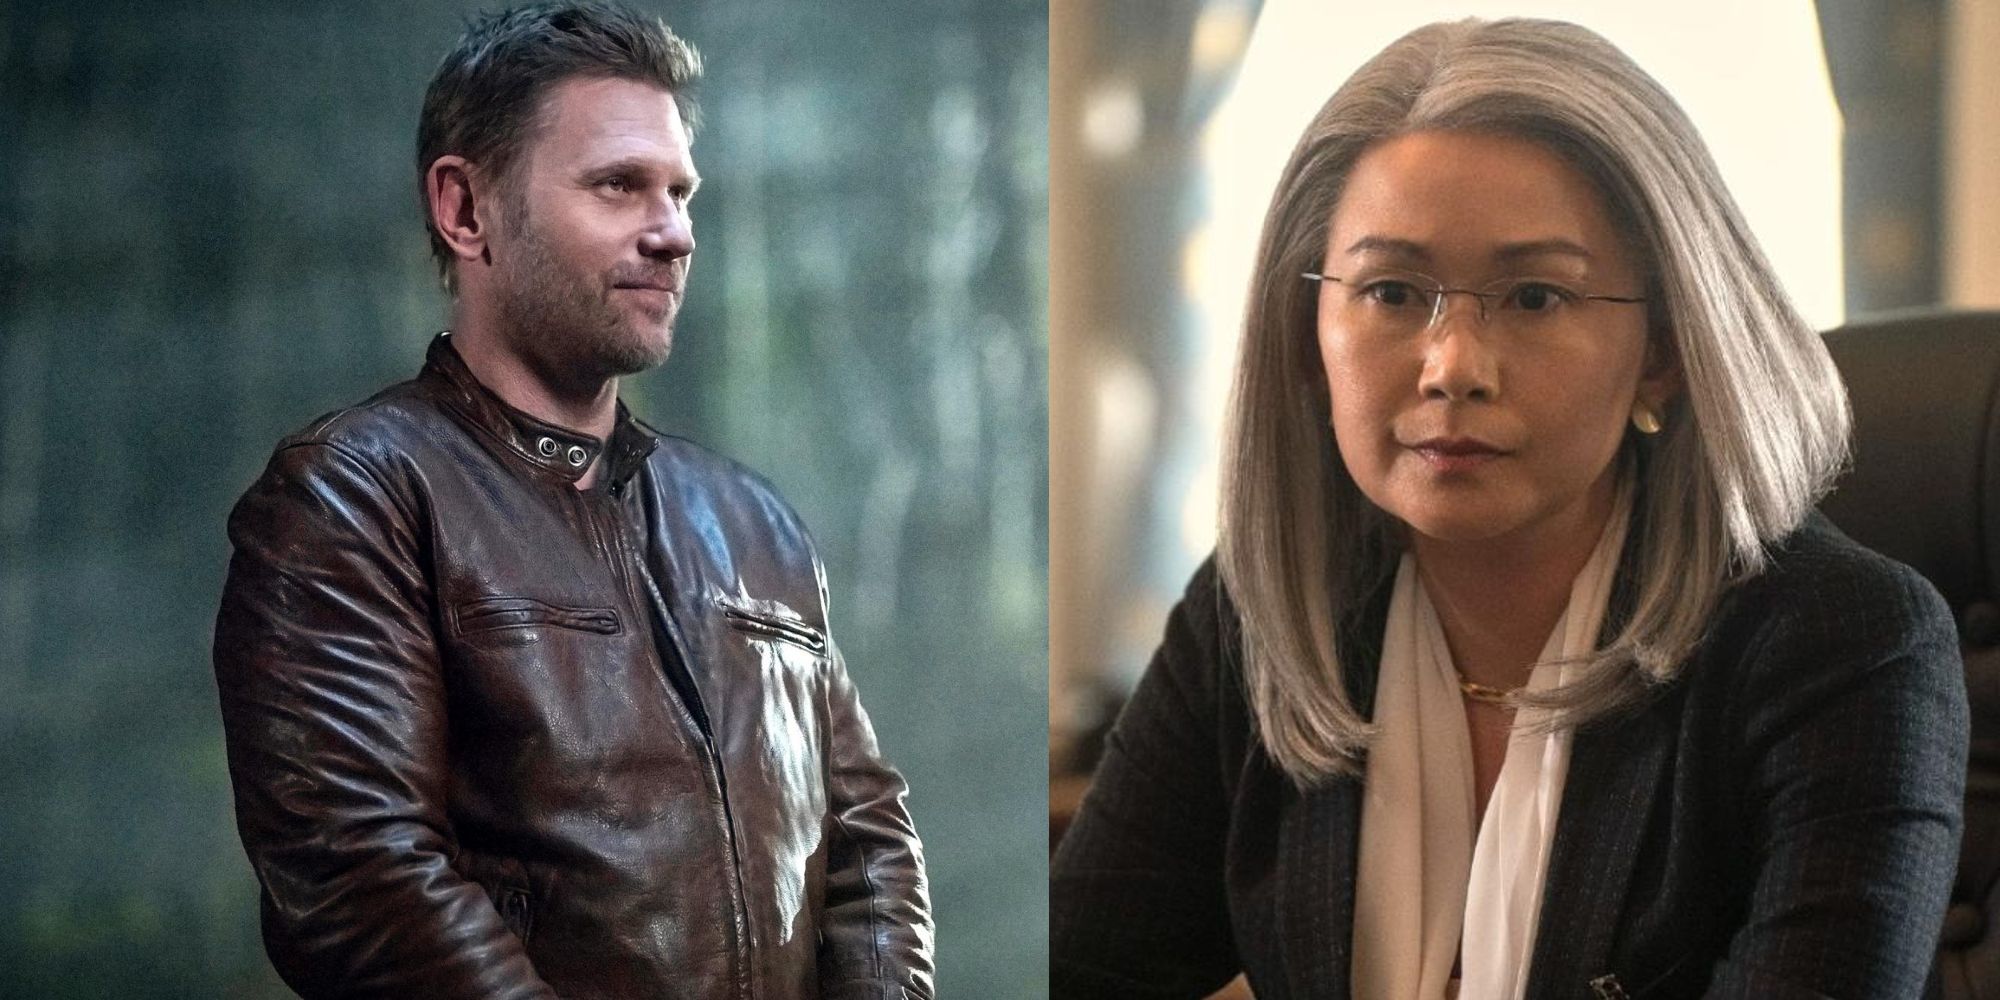 Side by side image: Mark Pellegrino as Lucifer in Supernatural; and Hong Chau in The Night Agent